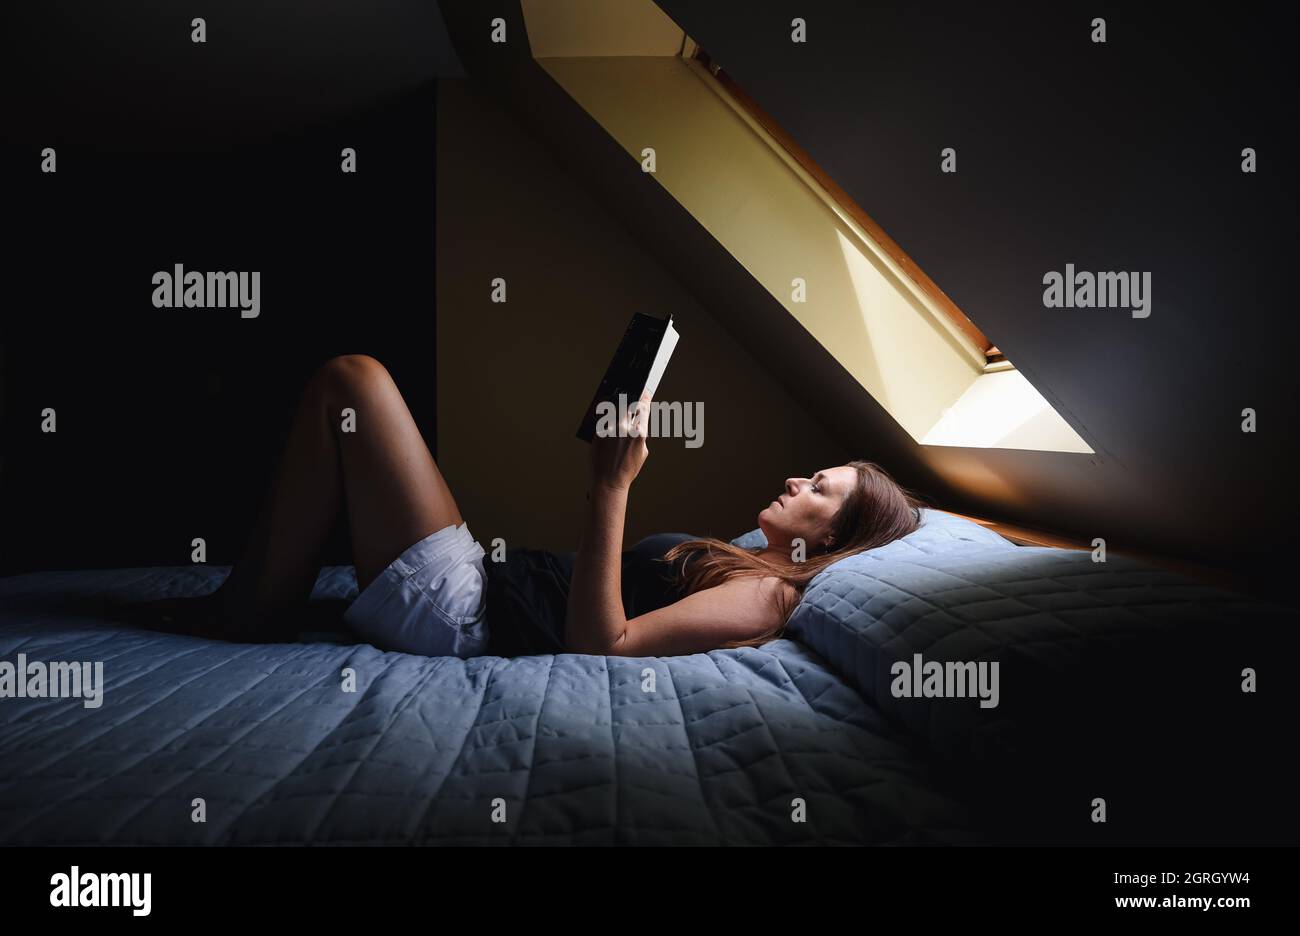 Woman laying on bed reading a book under a window in a dark room. Stock Photo